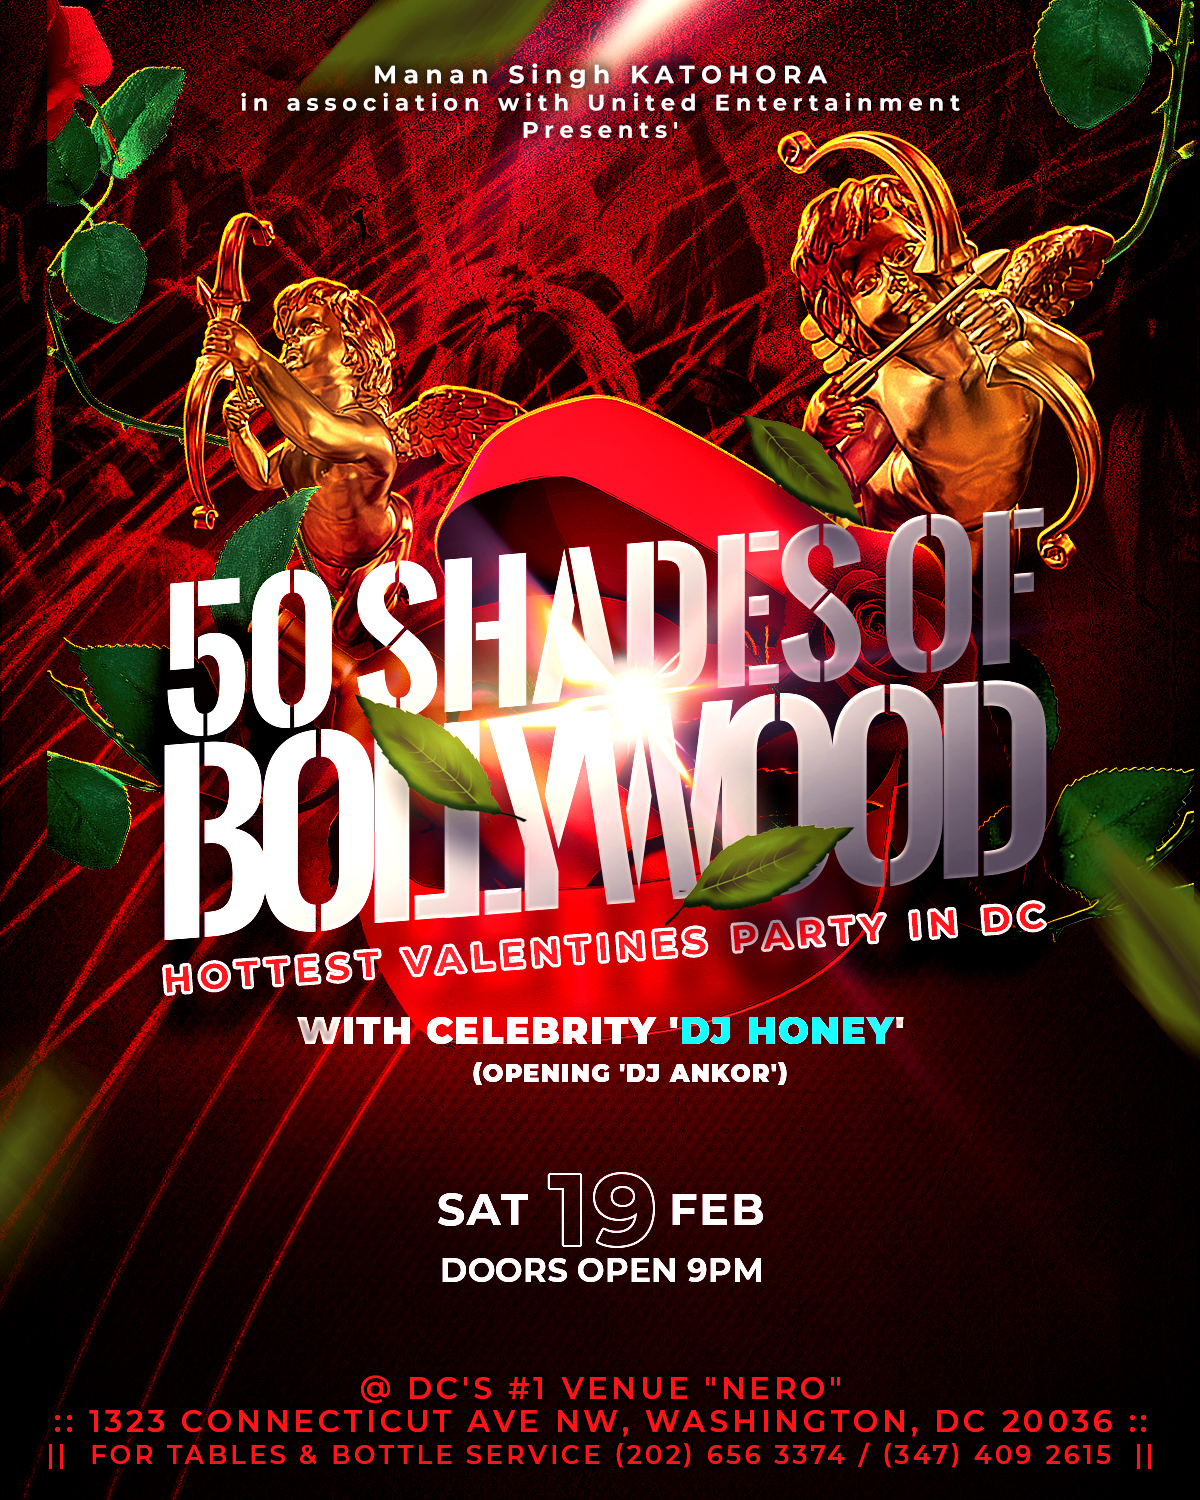 Manan Singh KATOHORA Presents - "50 SHADES OF BOLLYWOOD" - HOTTEST VALENTINES PARTY IN DC - with Celebrity 'DJ HONEY' (Opening 'DJ ANKOR')